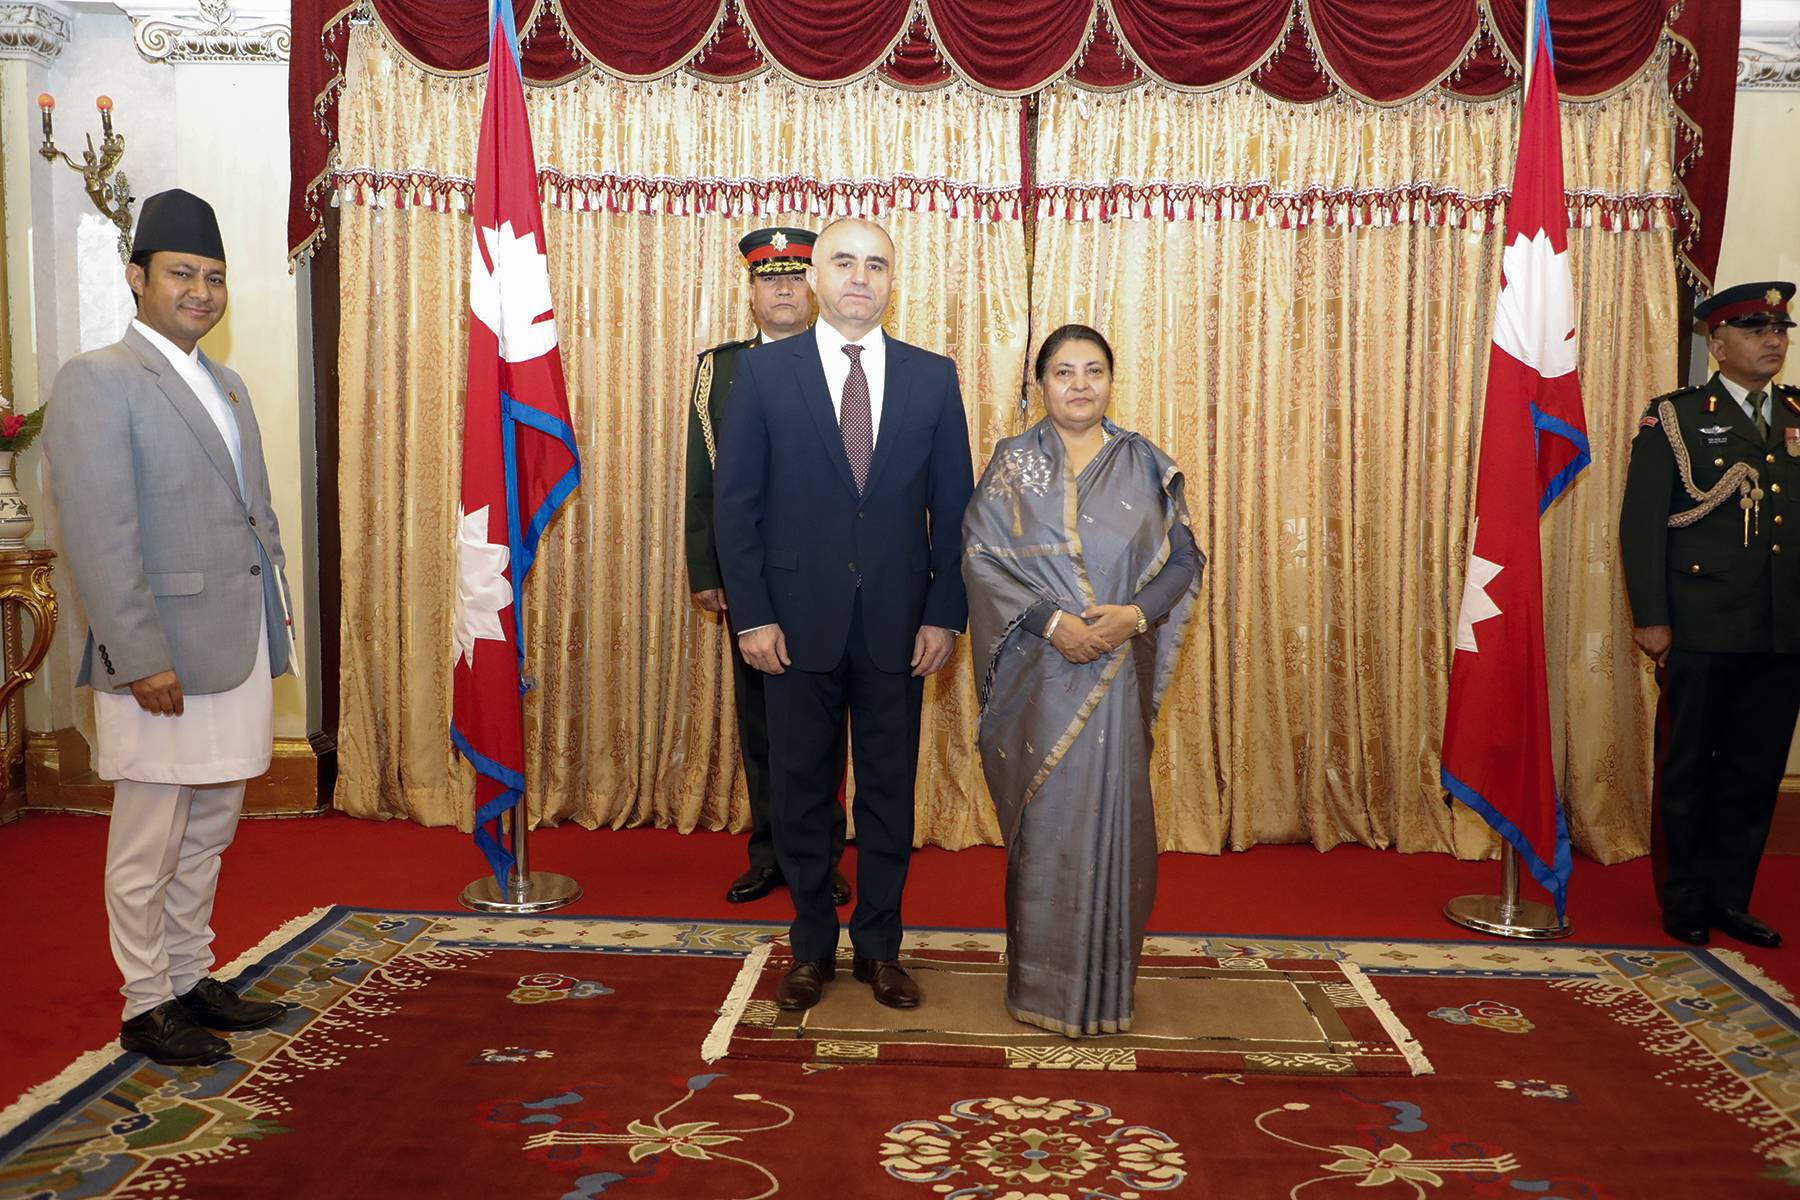 Ambassador Armen Martirosyan  Presented his Credentials to the President of Nepal